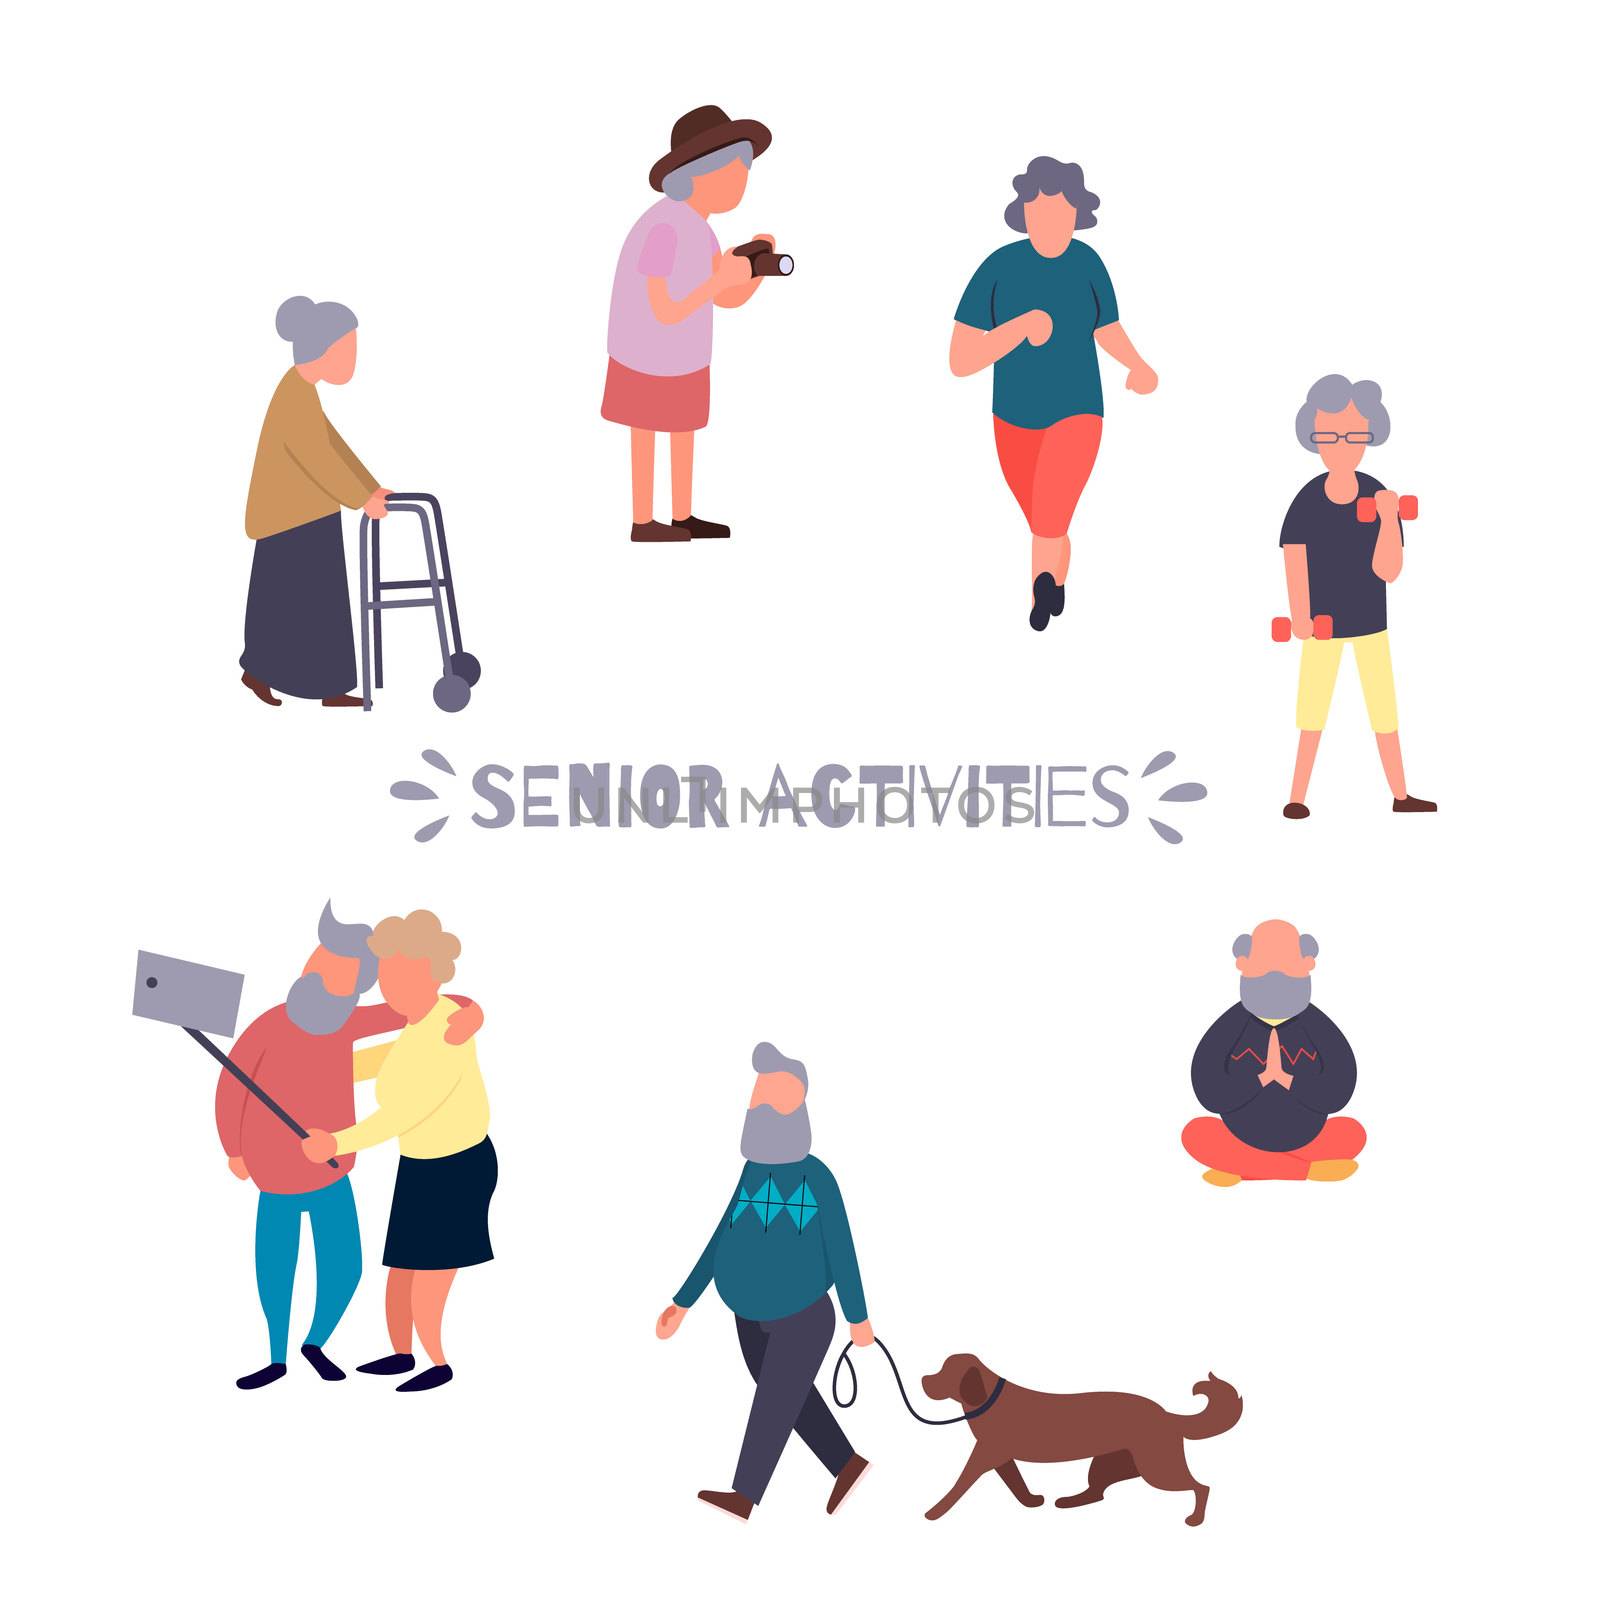 Recreation and leisure senior activities concept. Group of active old people. Elder people background. Cartoon elderly female character.